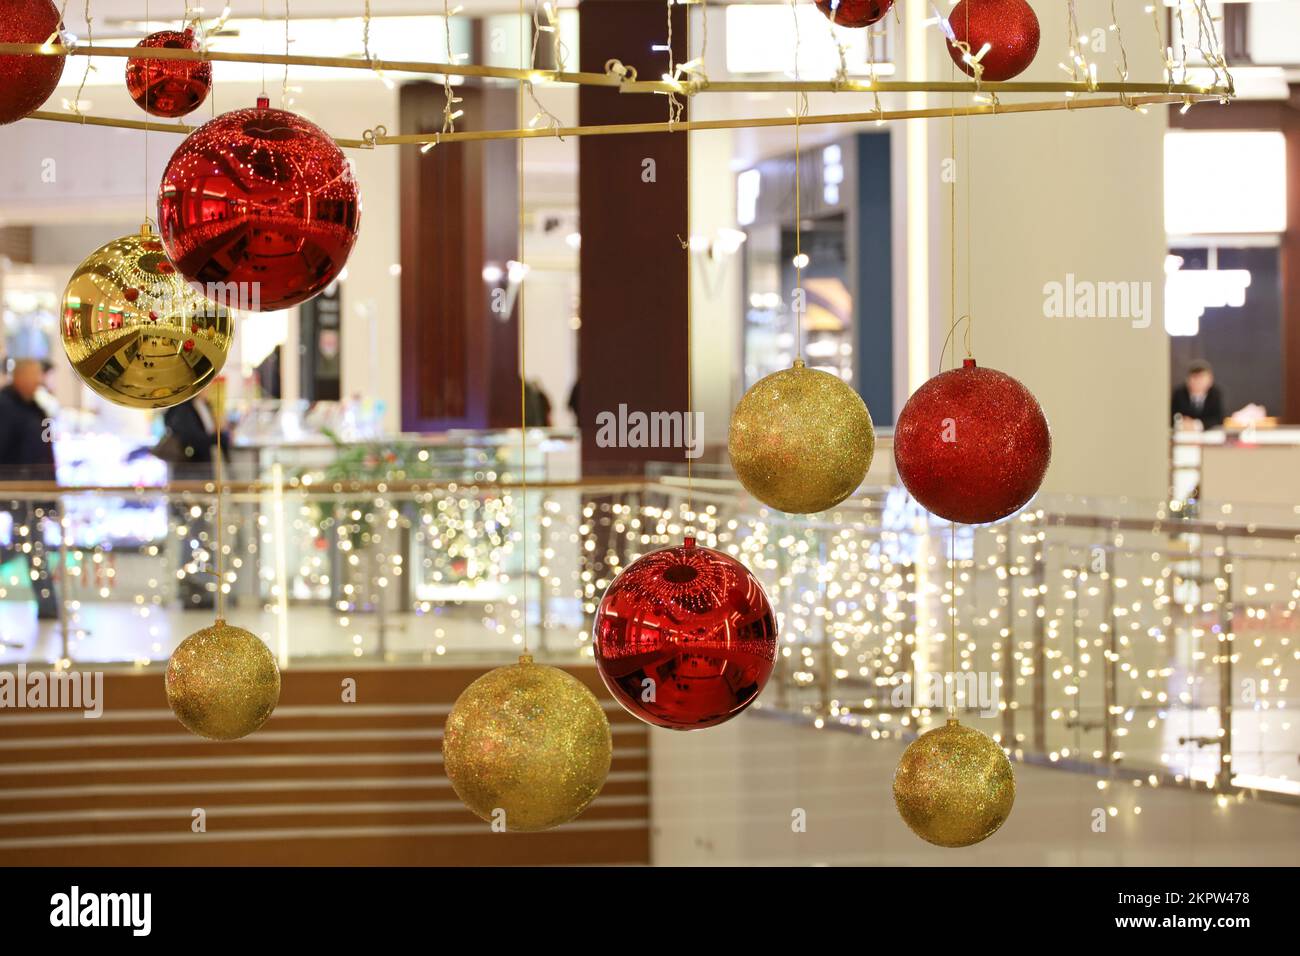 New Year decorations in a shopping mall. Red and golden toy balls hanging in a store during Christmas holidays Stock Photo